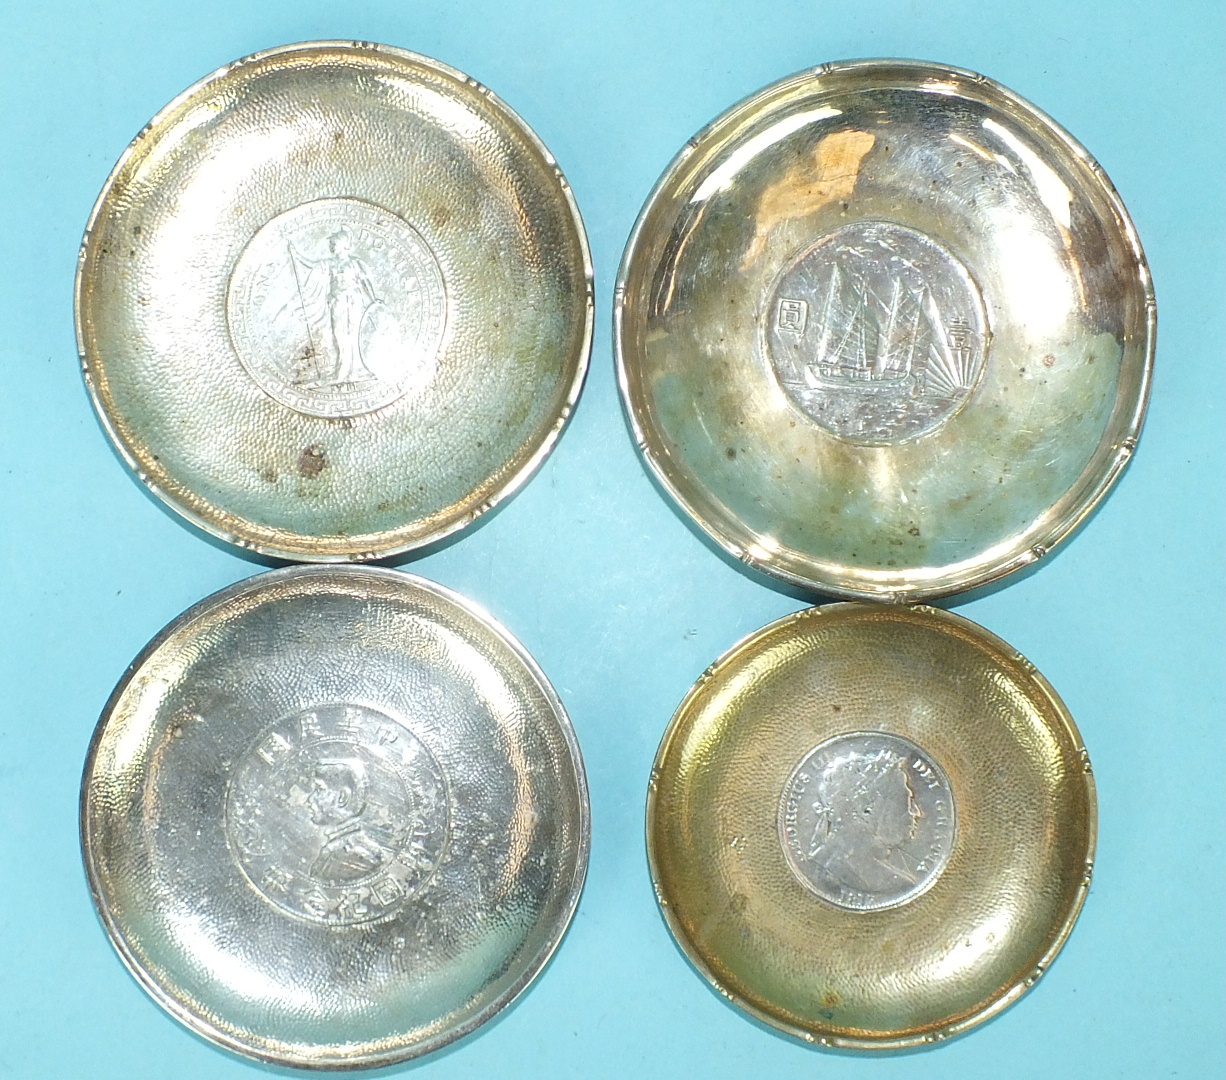 A Chinese beaten silver circular pin tray centred by a memento coin, "Birth of the Republic of